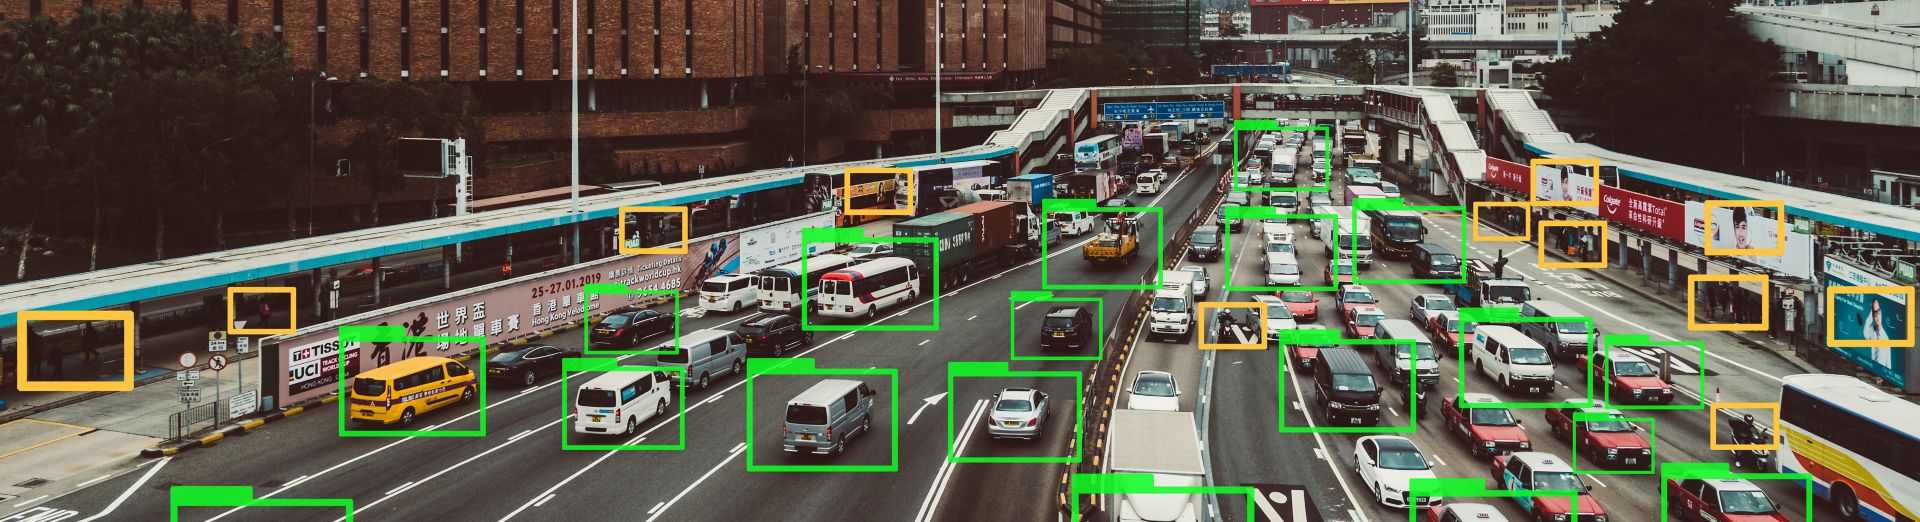 Machine learning technology tracking cars on a highway